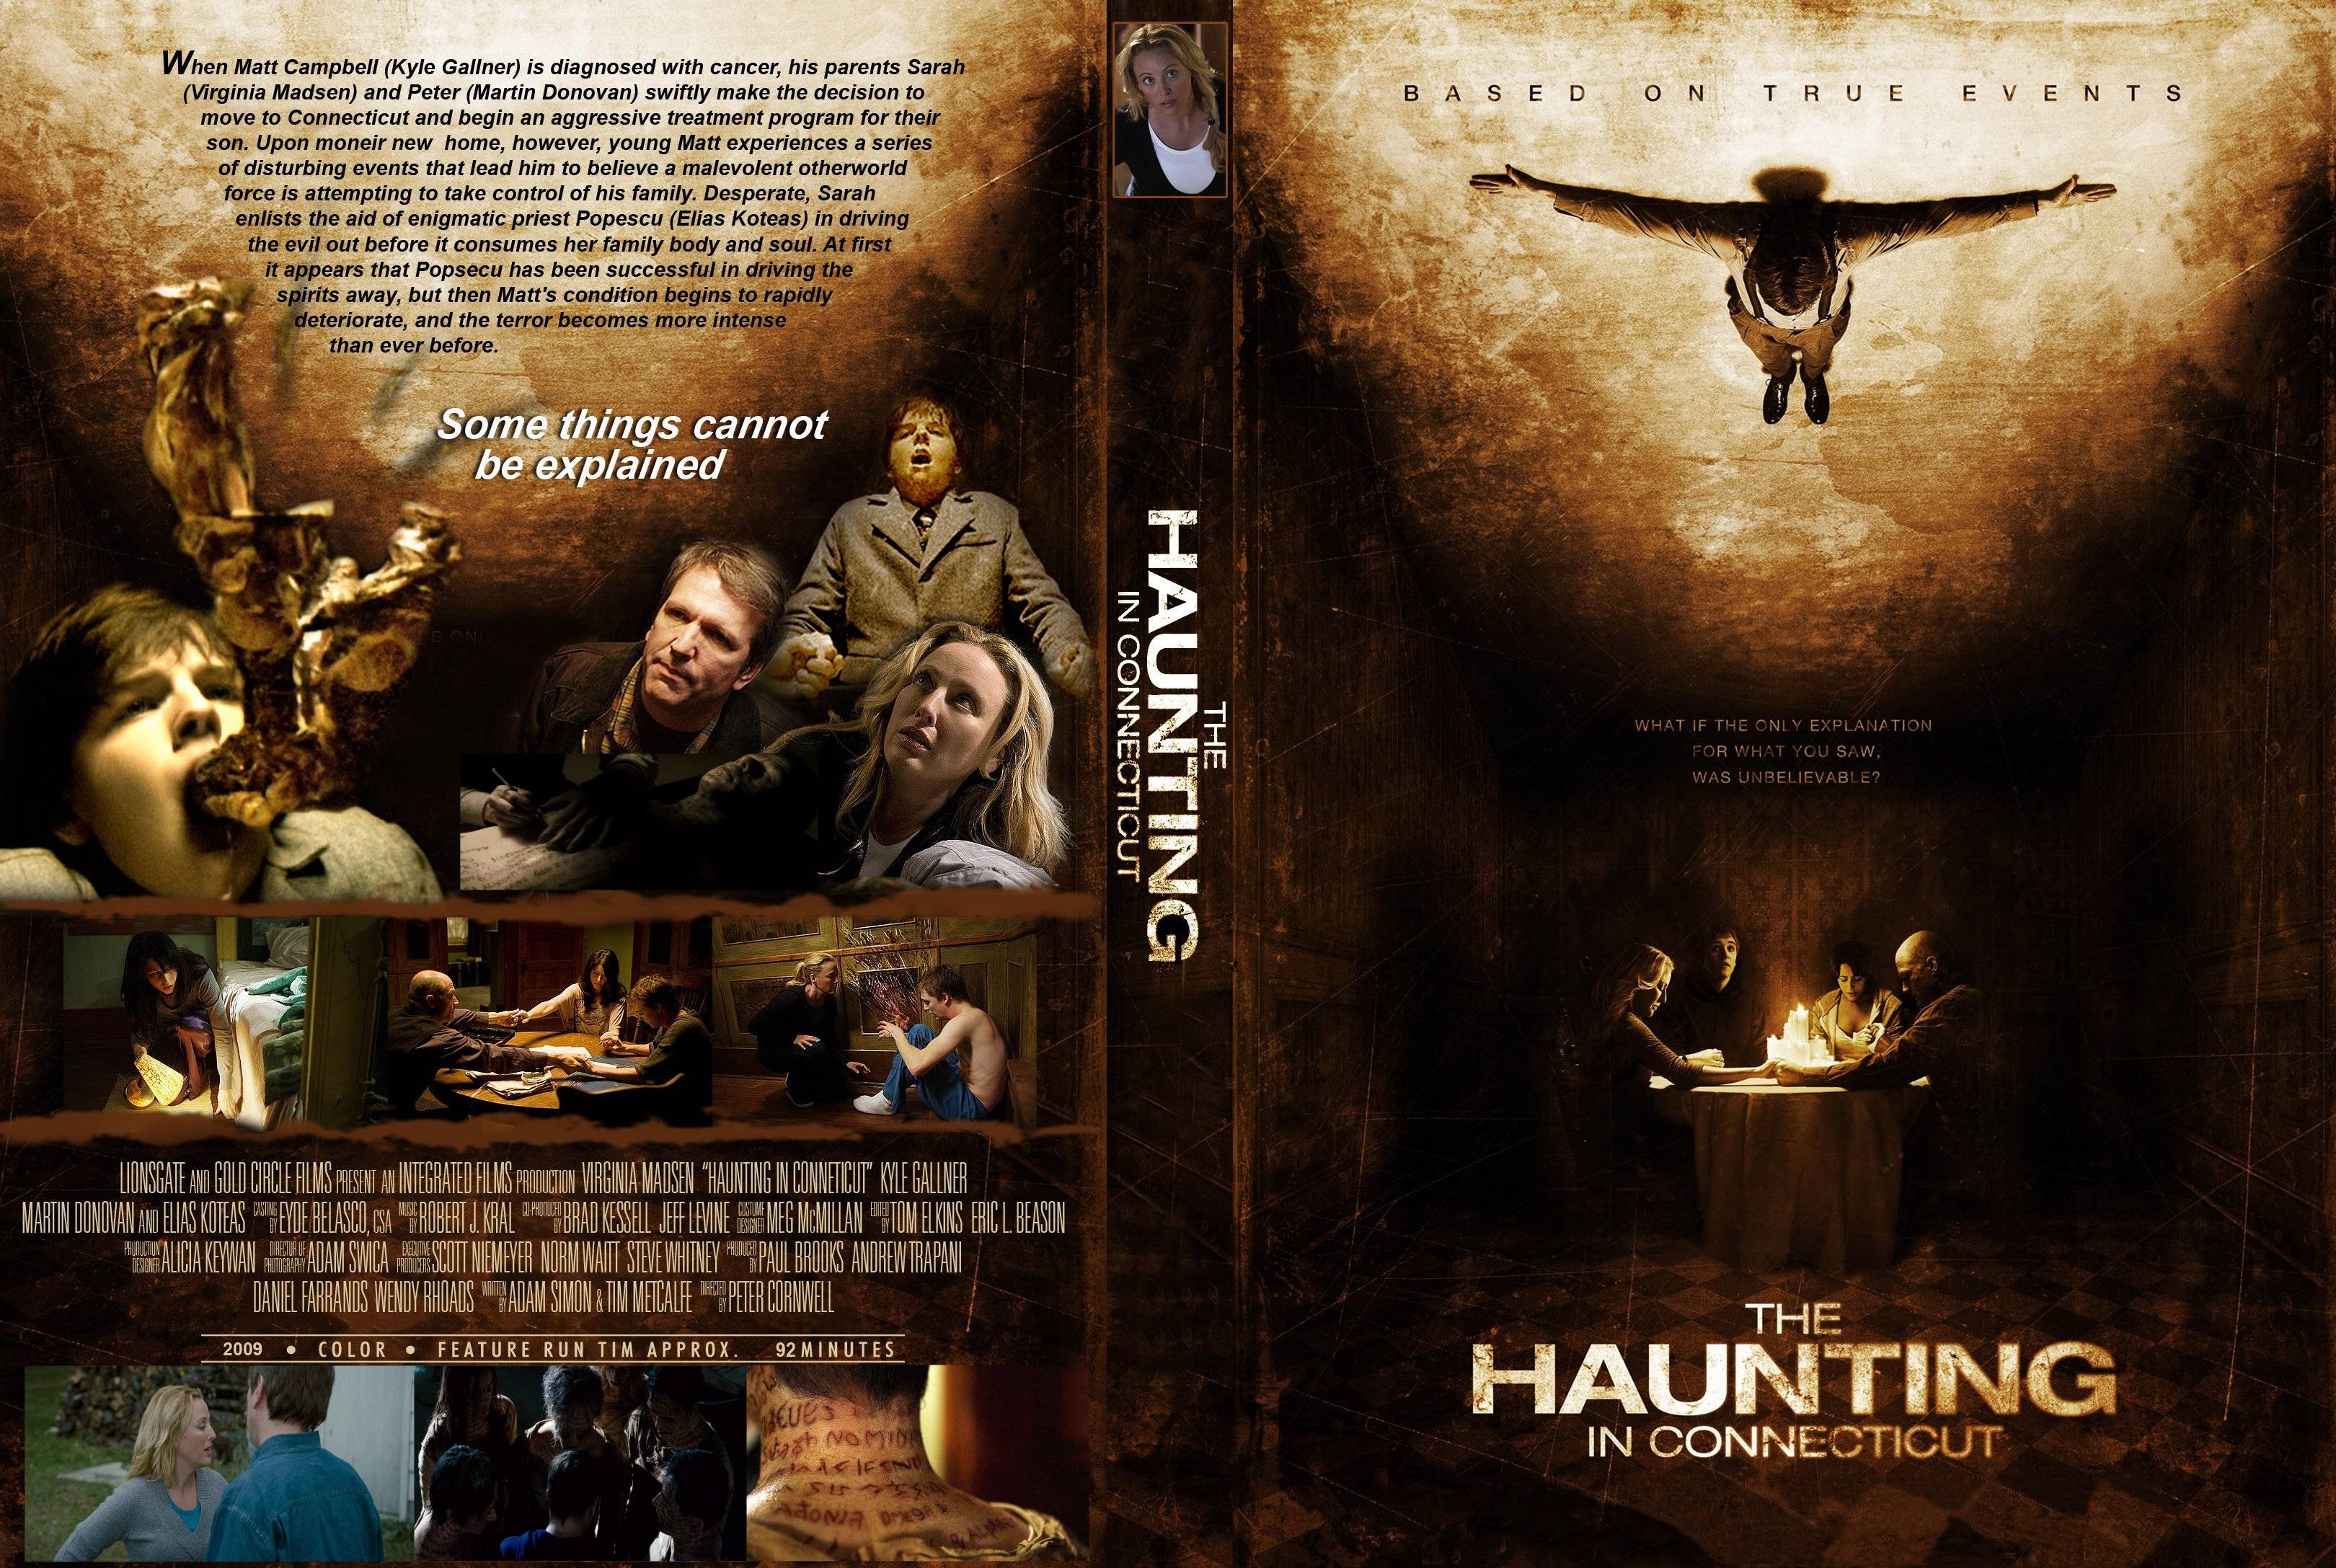 The Haunting in Connecticut / The Haunting in Connecticut (2009)